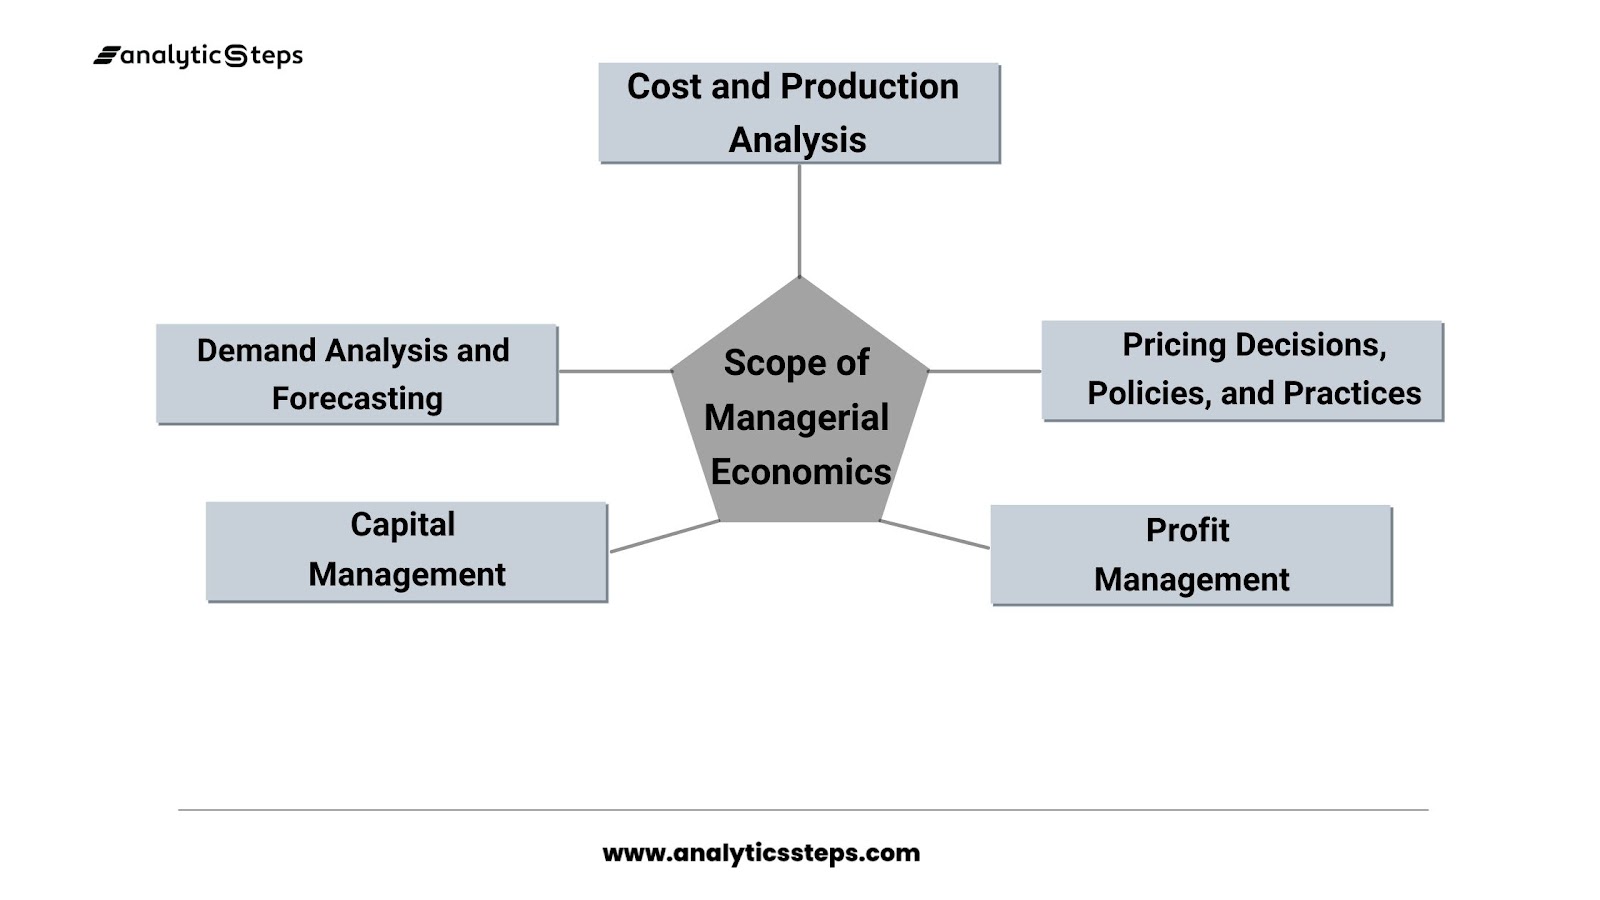 The image shows the scope of managerial economics that are demand analysis and forecasting; cost and production analysis; Pricing decisions, policies, and practices; profit management; and capital management.